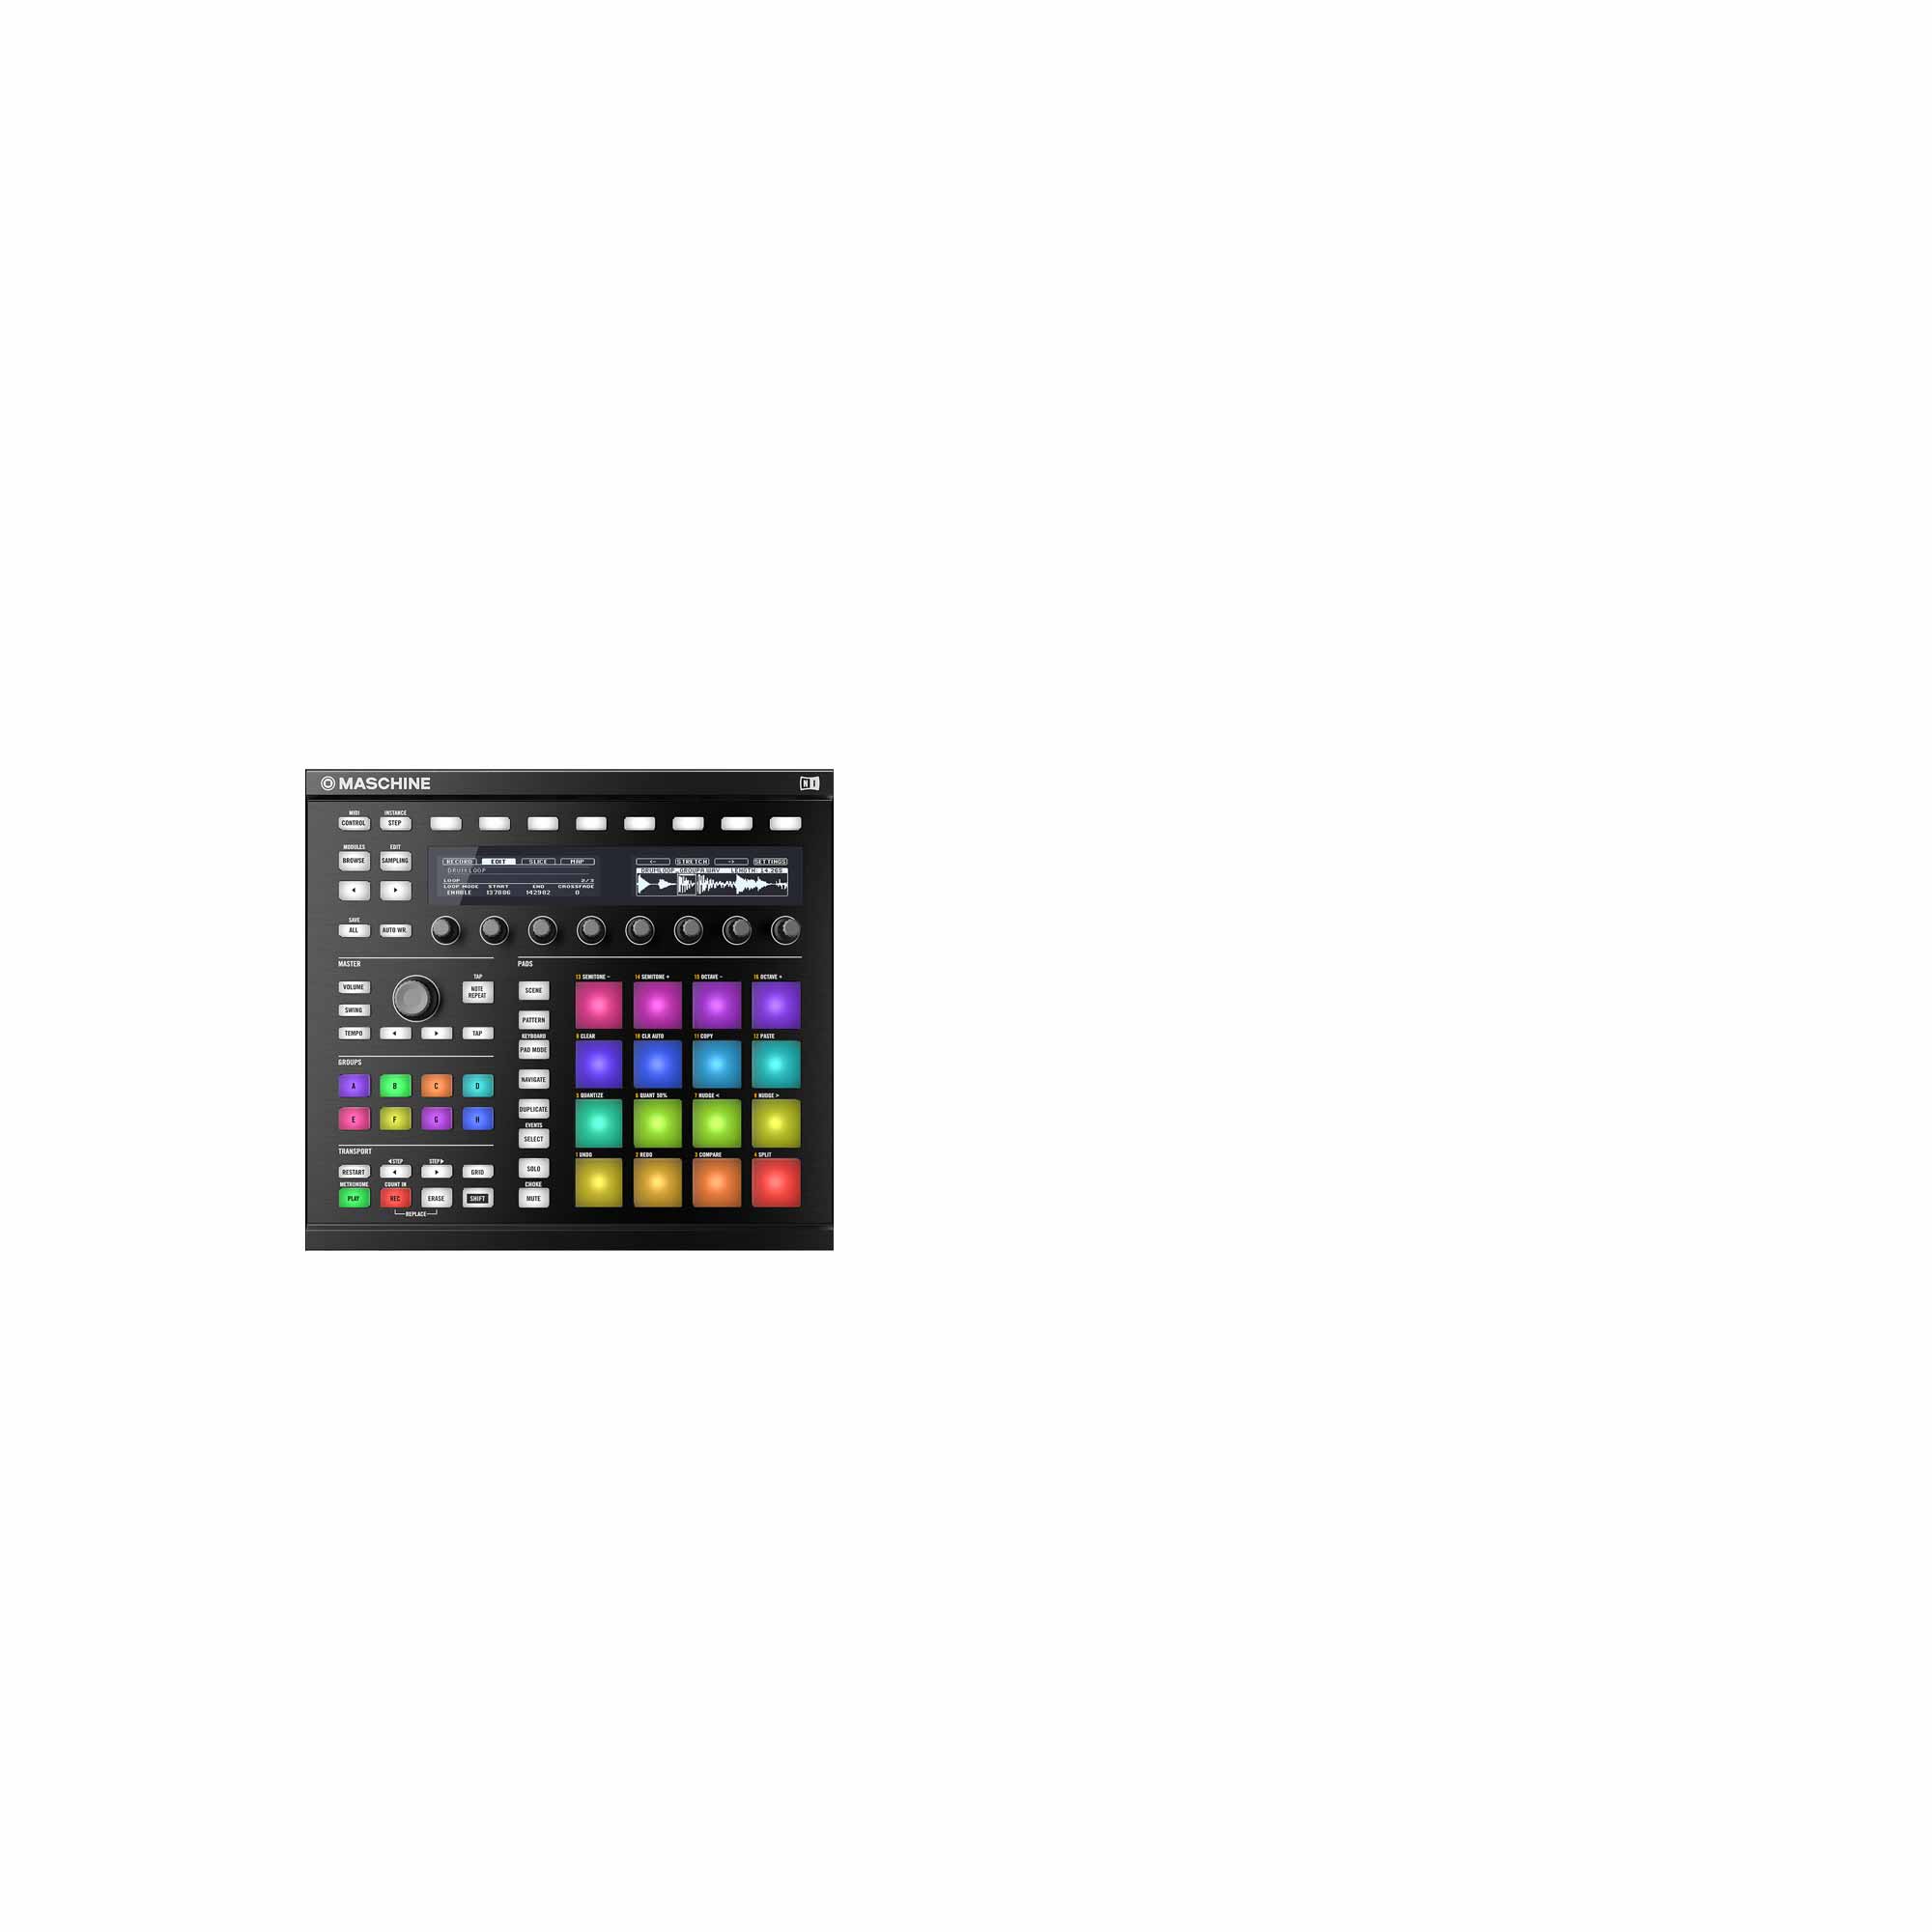 Native Instruments Announces New Generation Of Maschine Hardware & Software